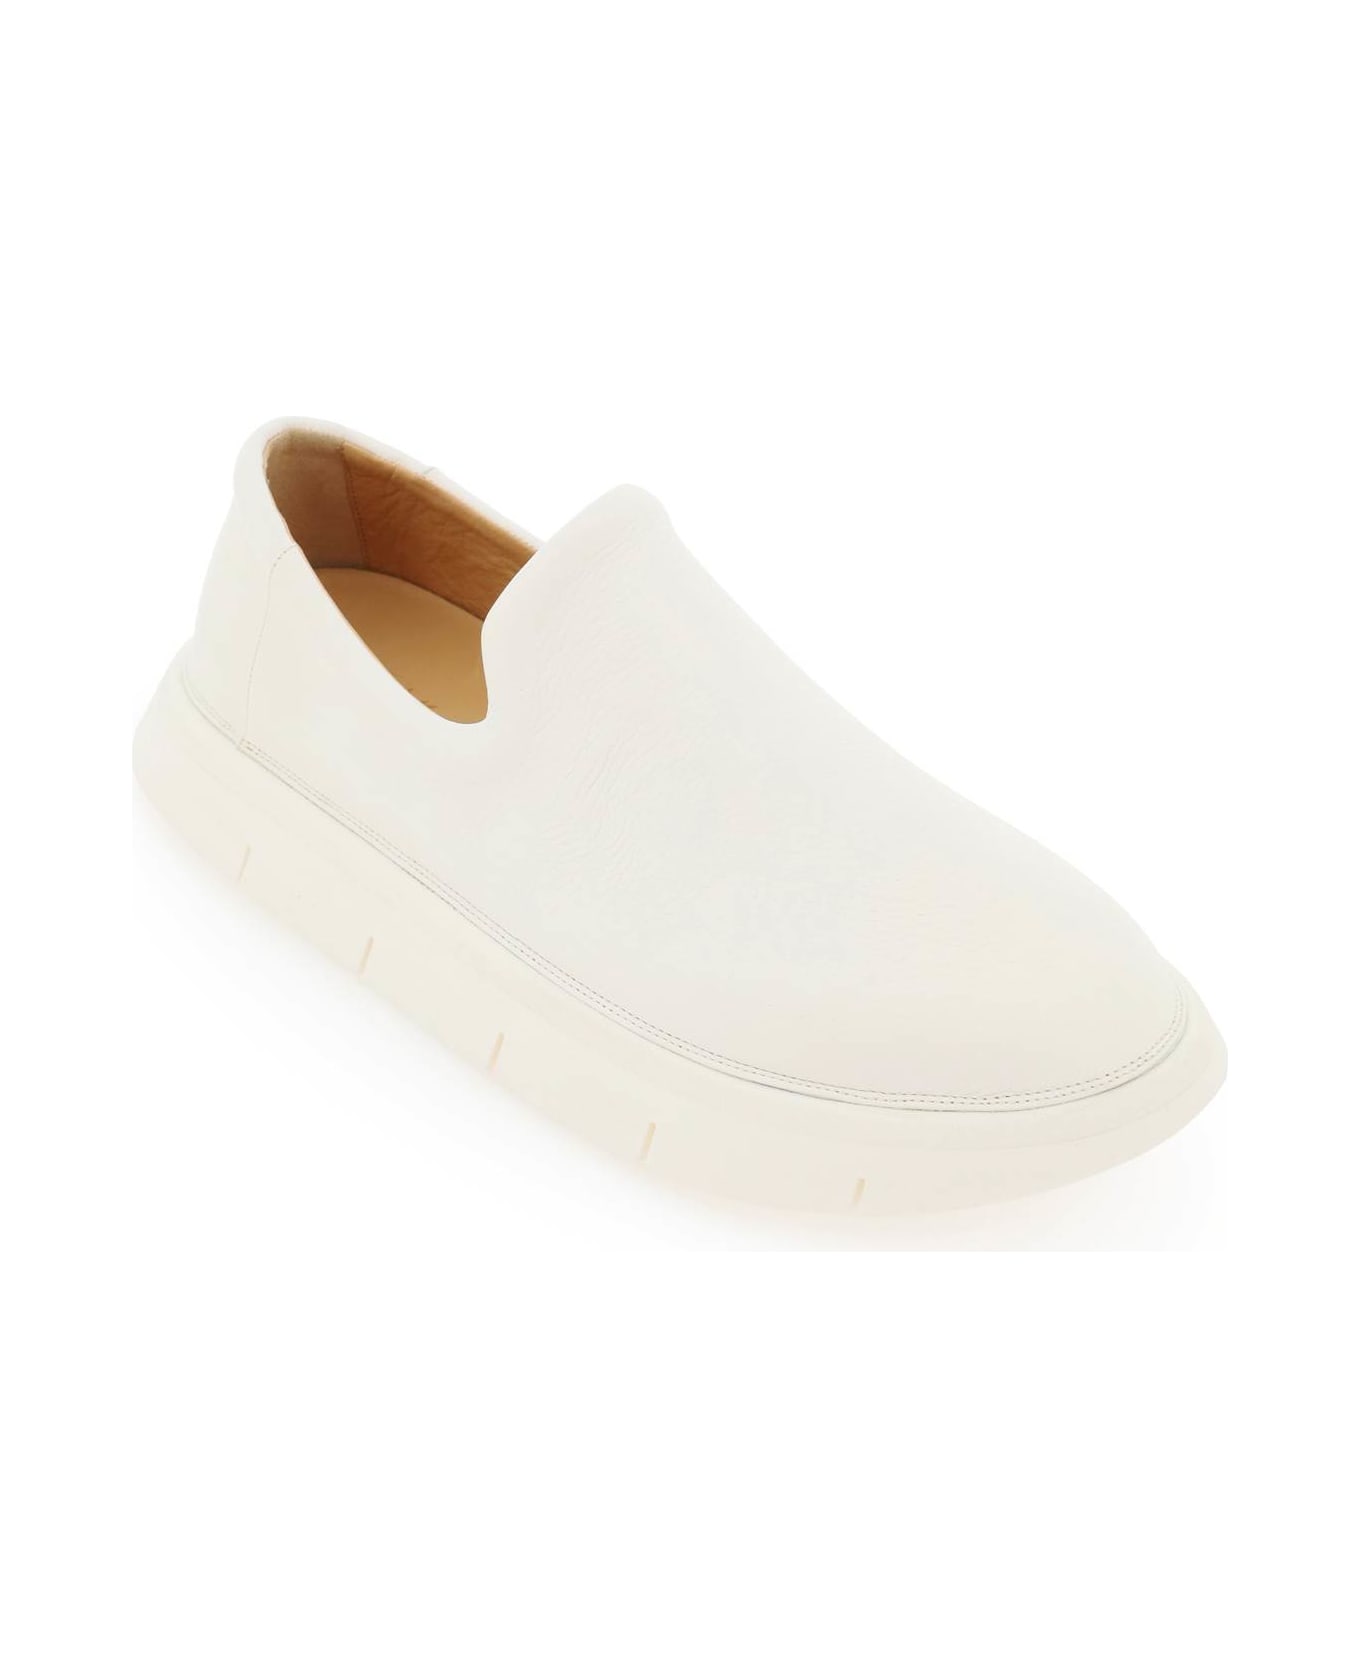 Marsell 'intagliata' Grained Leather Slip-on Shoes - BIANCO OPTICAL (White)